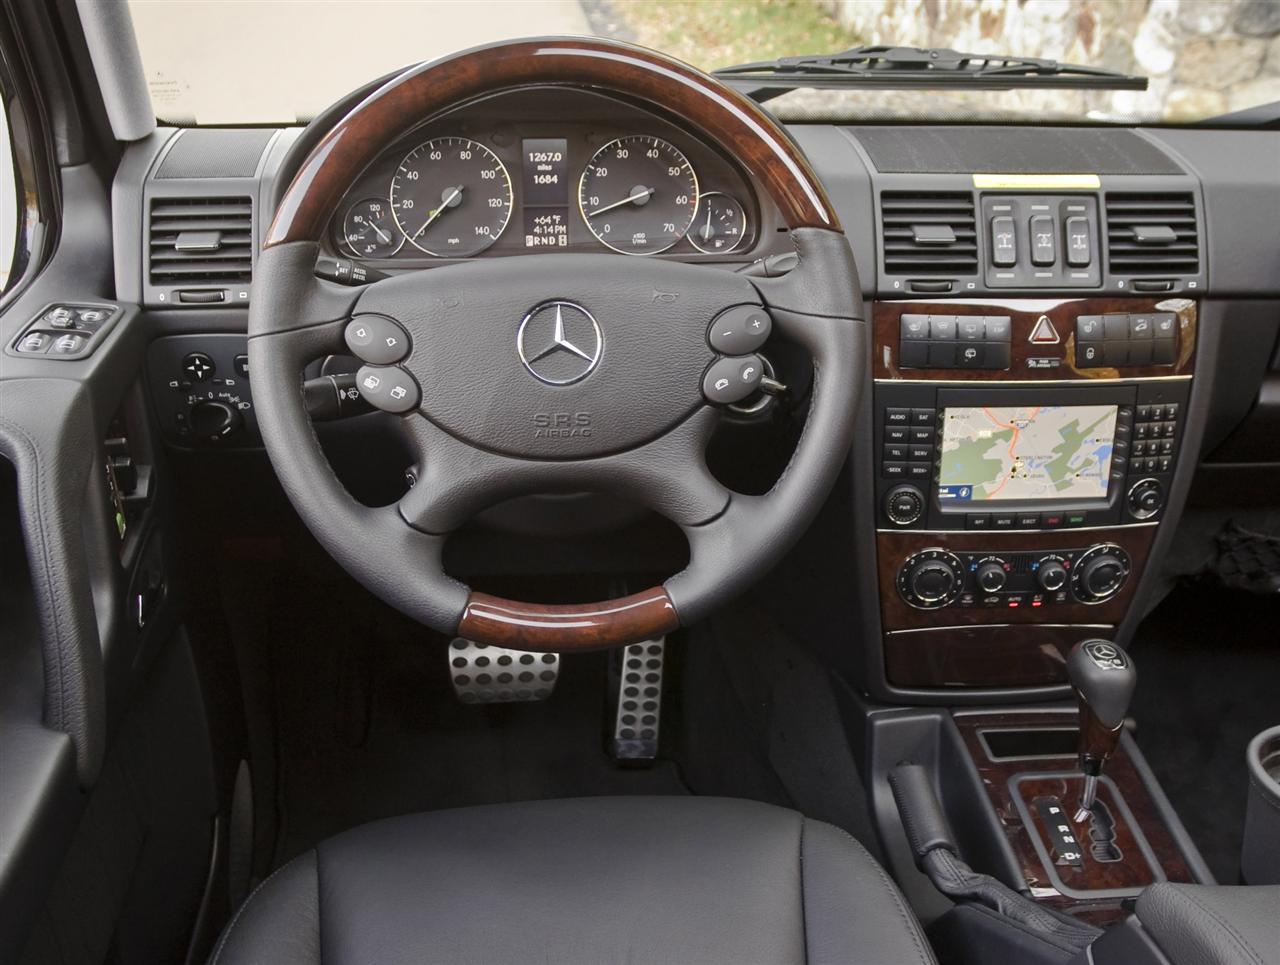 2009 Mercedes-Benz G Class Image. Photo 2 of 23